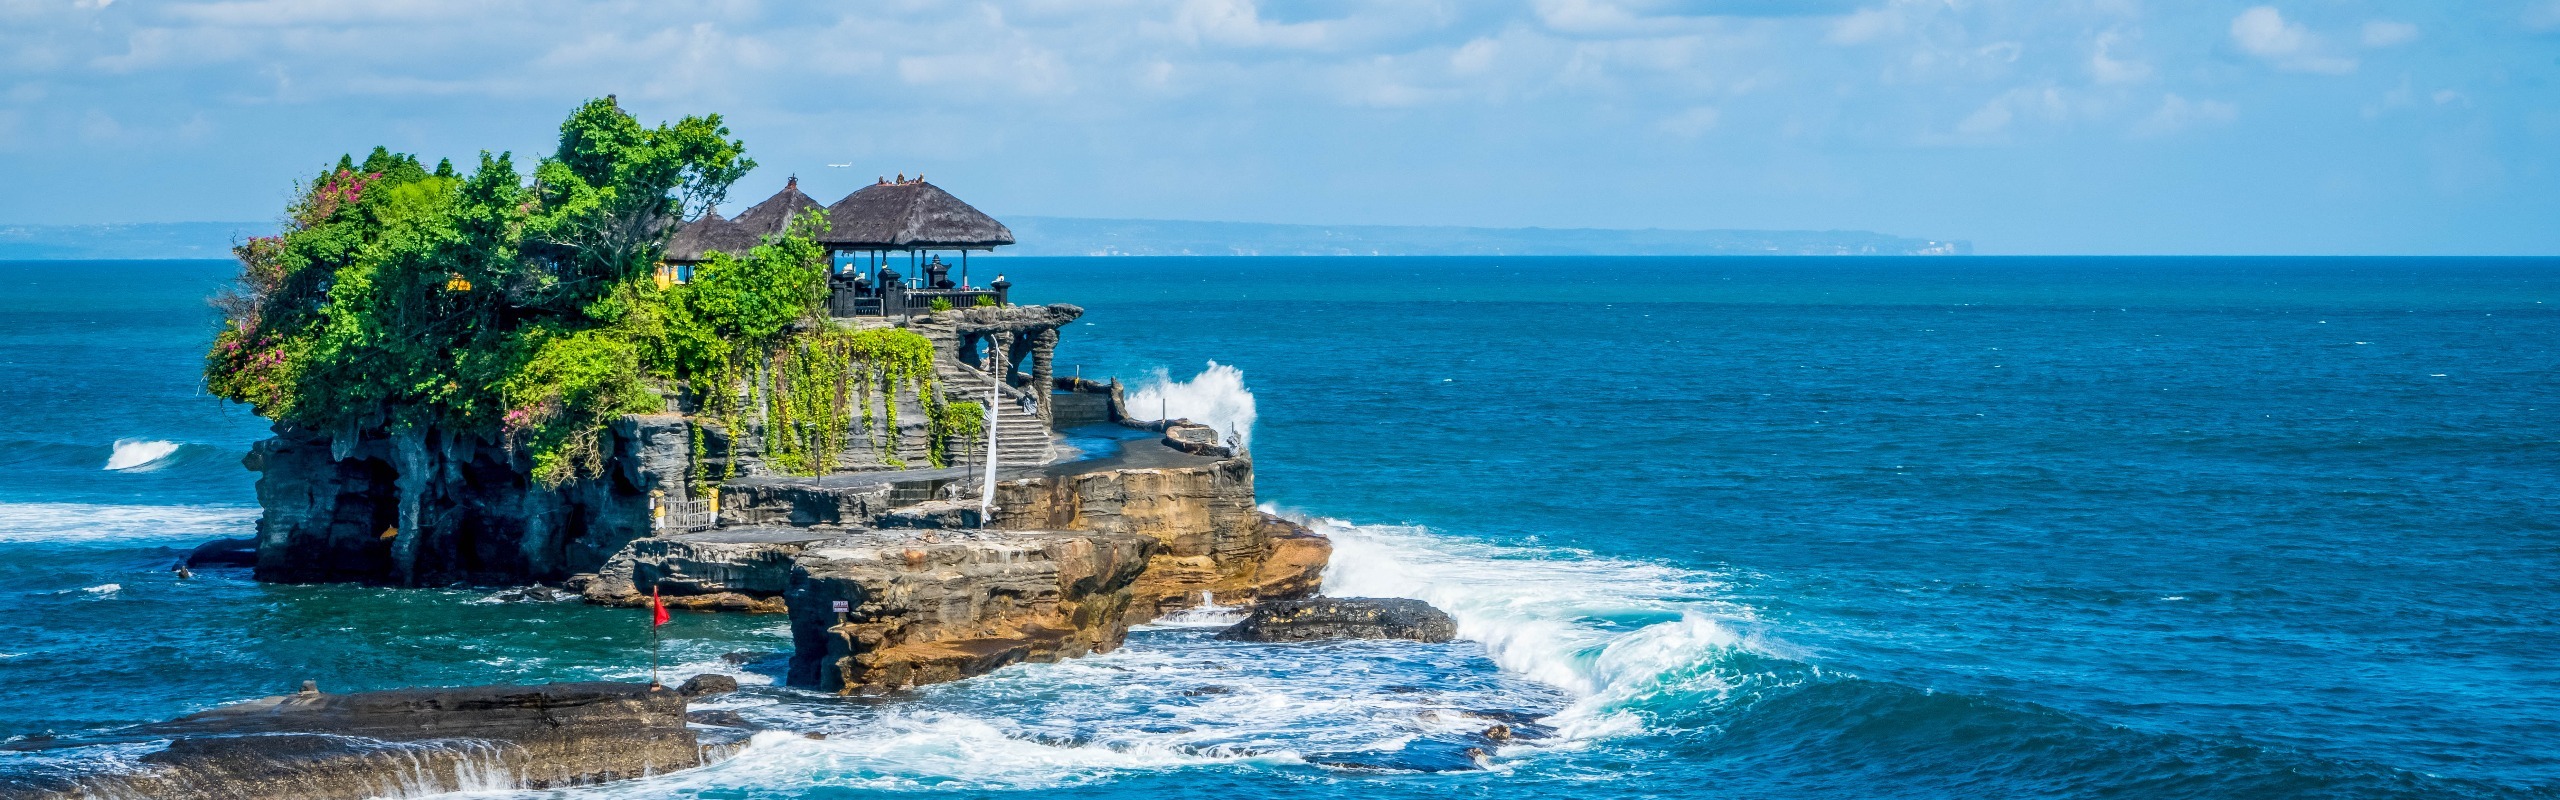 Best (and Worst) Times to Visit Bali 2022/2023 & When is the Rainy Season